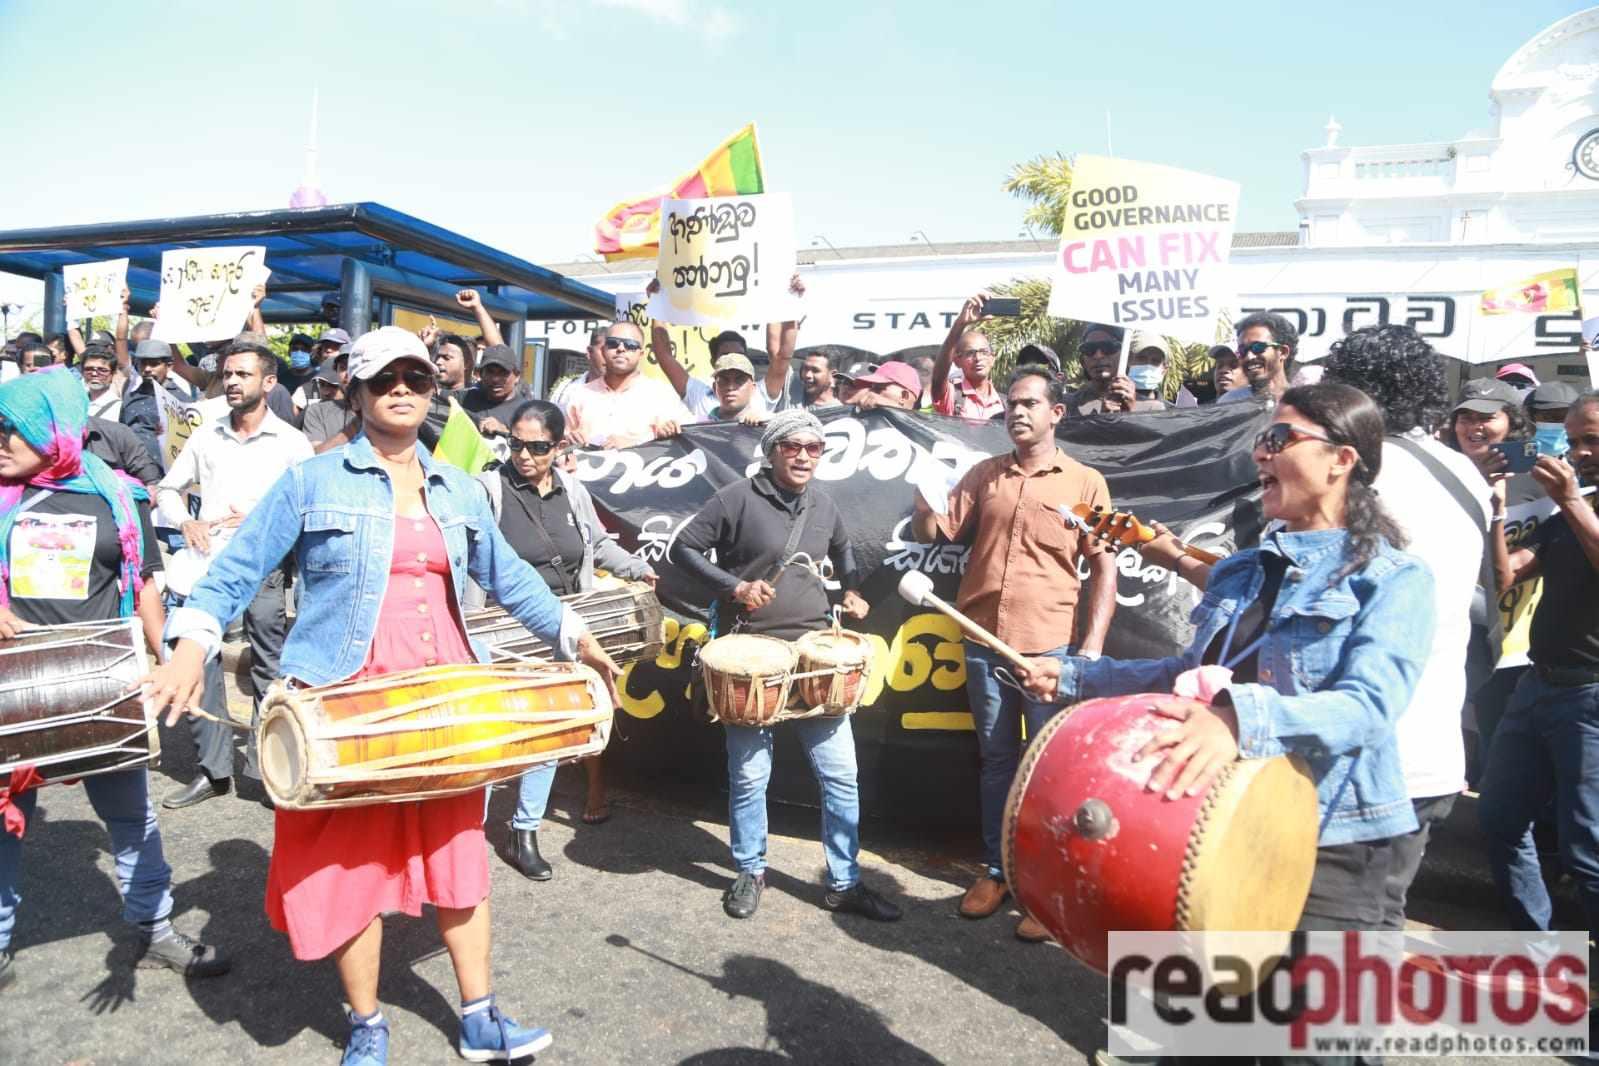 Protest held at Colombo Fort demanding the release of GGG activists - Read Photos